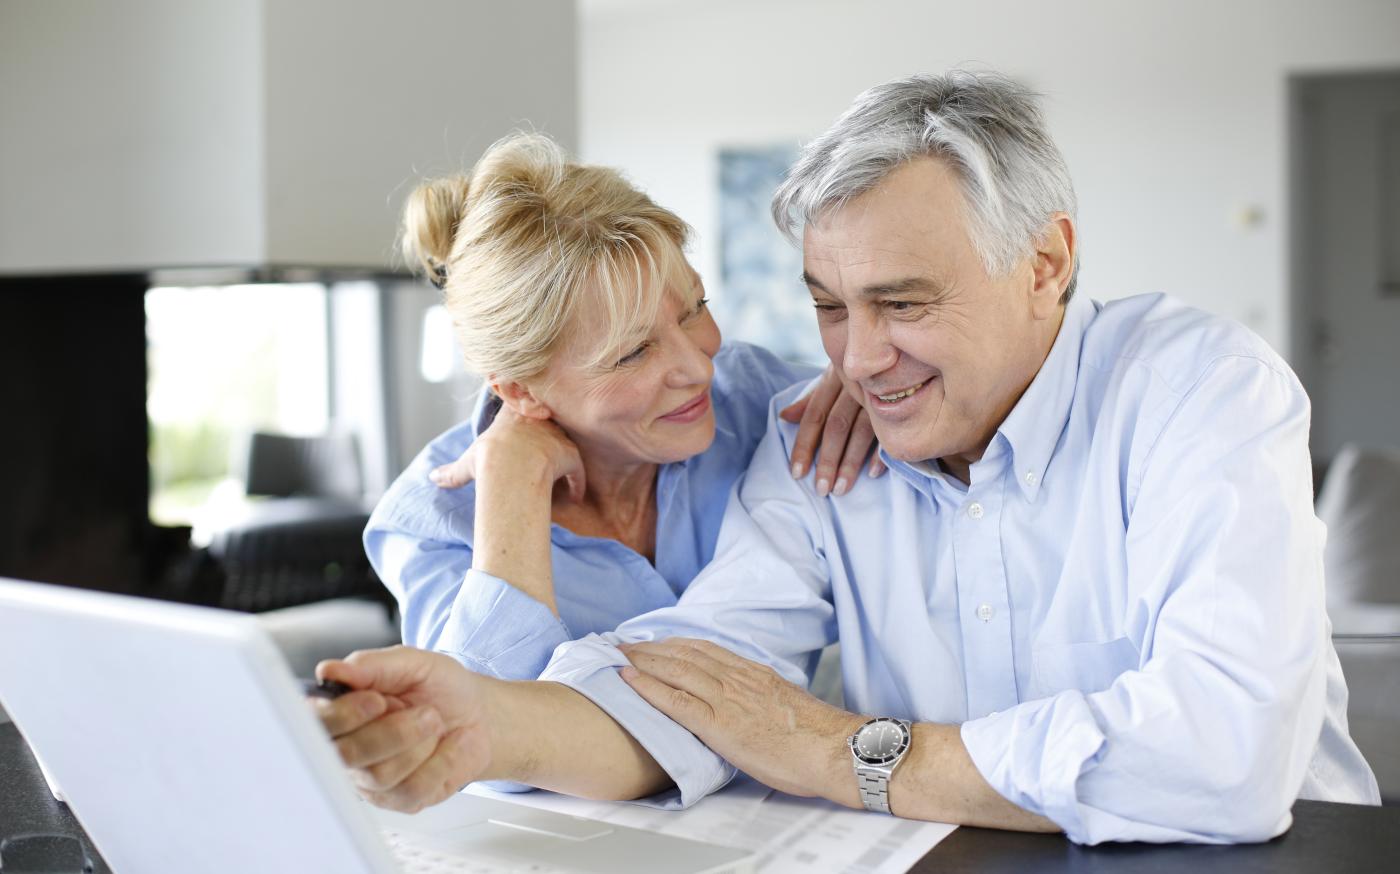 Financial Planning for Physically Ill Spouse | JS Wealth Advisors